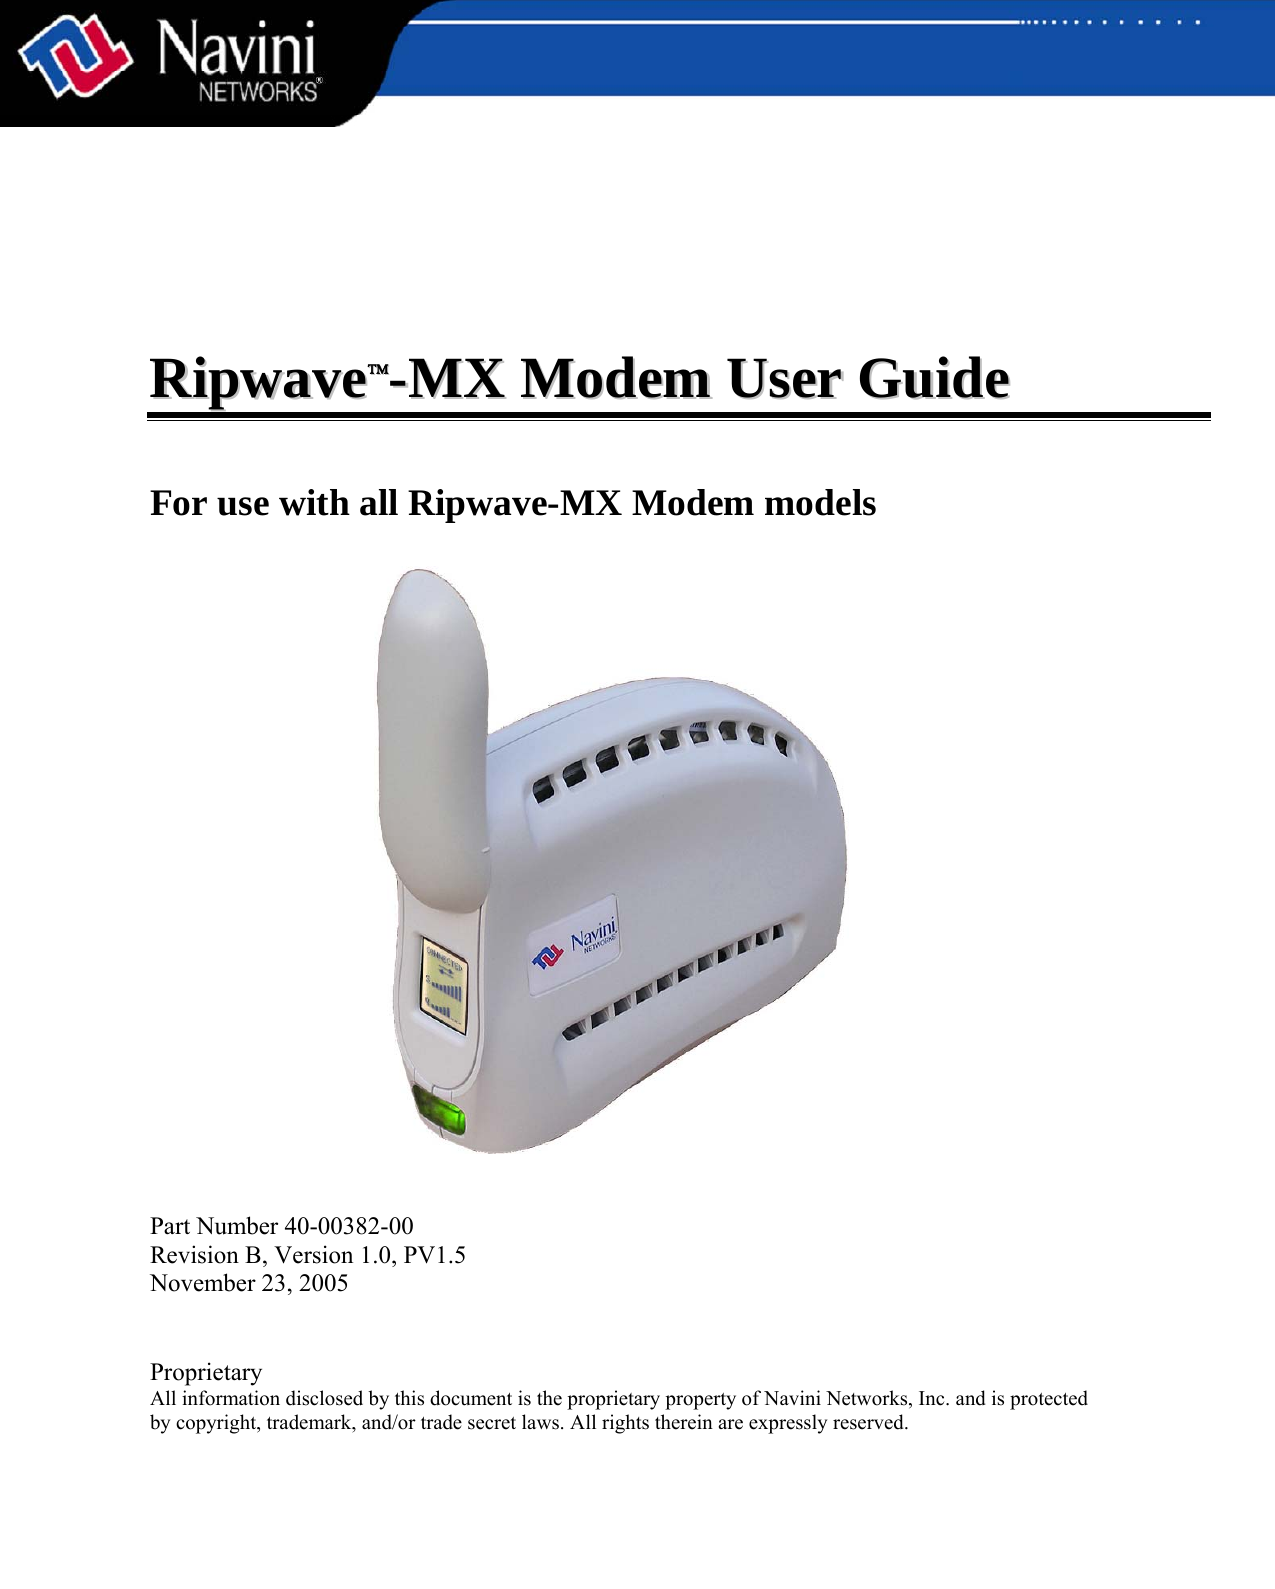           RRiippwwaavvee™™--MMXX  MMooddeemm  UUsseerr  GGuuiiddee    For use with all Ripwave-MX Modem models    Part Number 40-00382-00 Revision B, Version 1.0, PV1.5 November 23, 2005   Proprietary All information disclosed by this document is the proprietary property of Navini Networks, Inc. and is protected  by copyright, trademark, and/or trade secret laws. All rights therein are expressly reserved. 